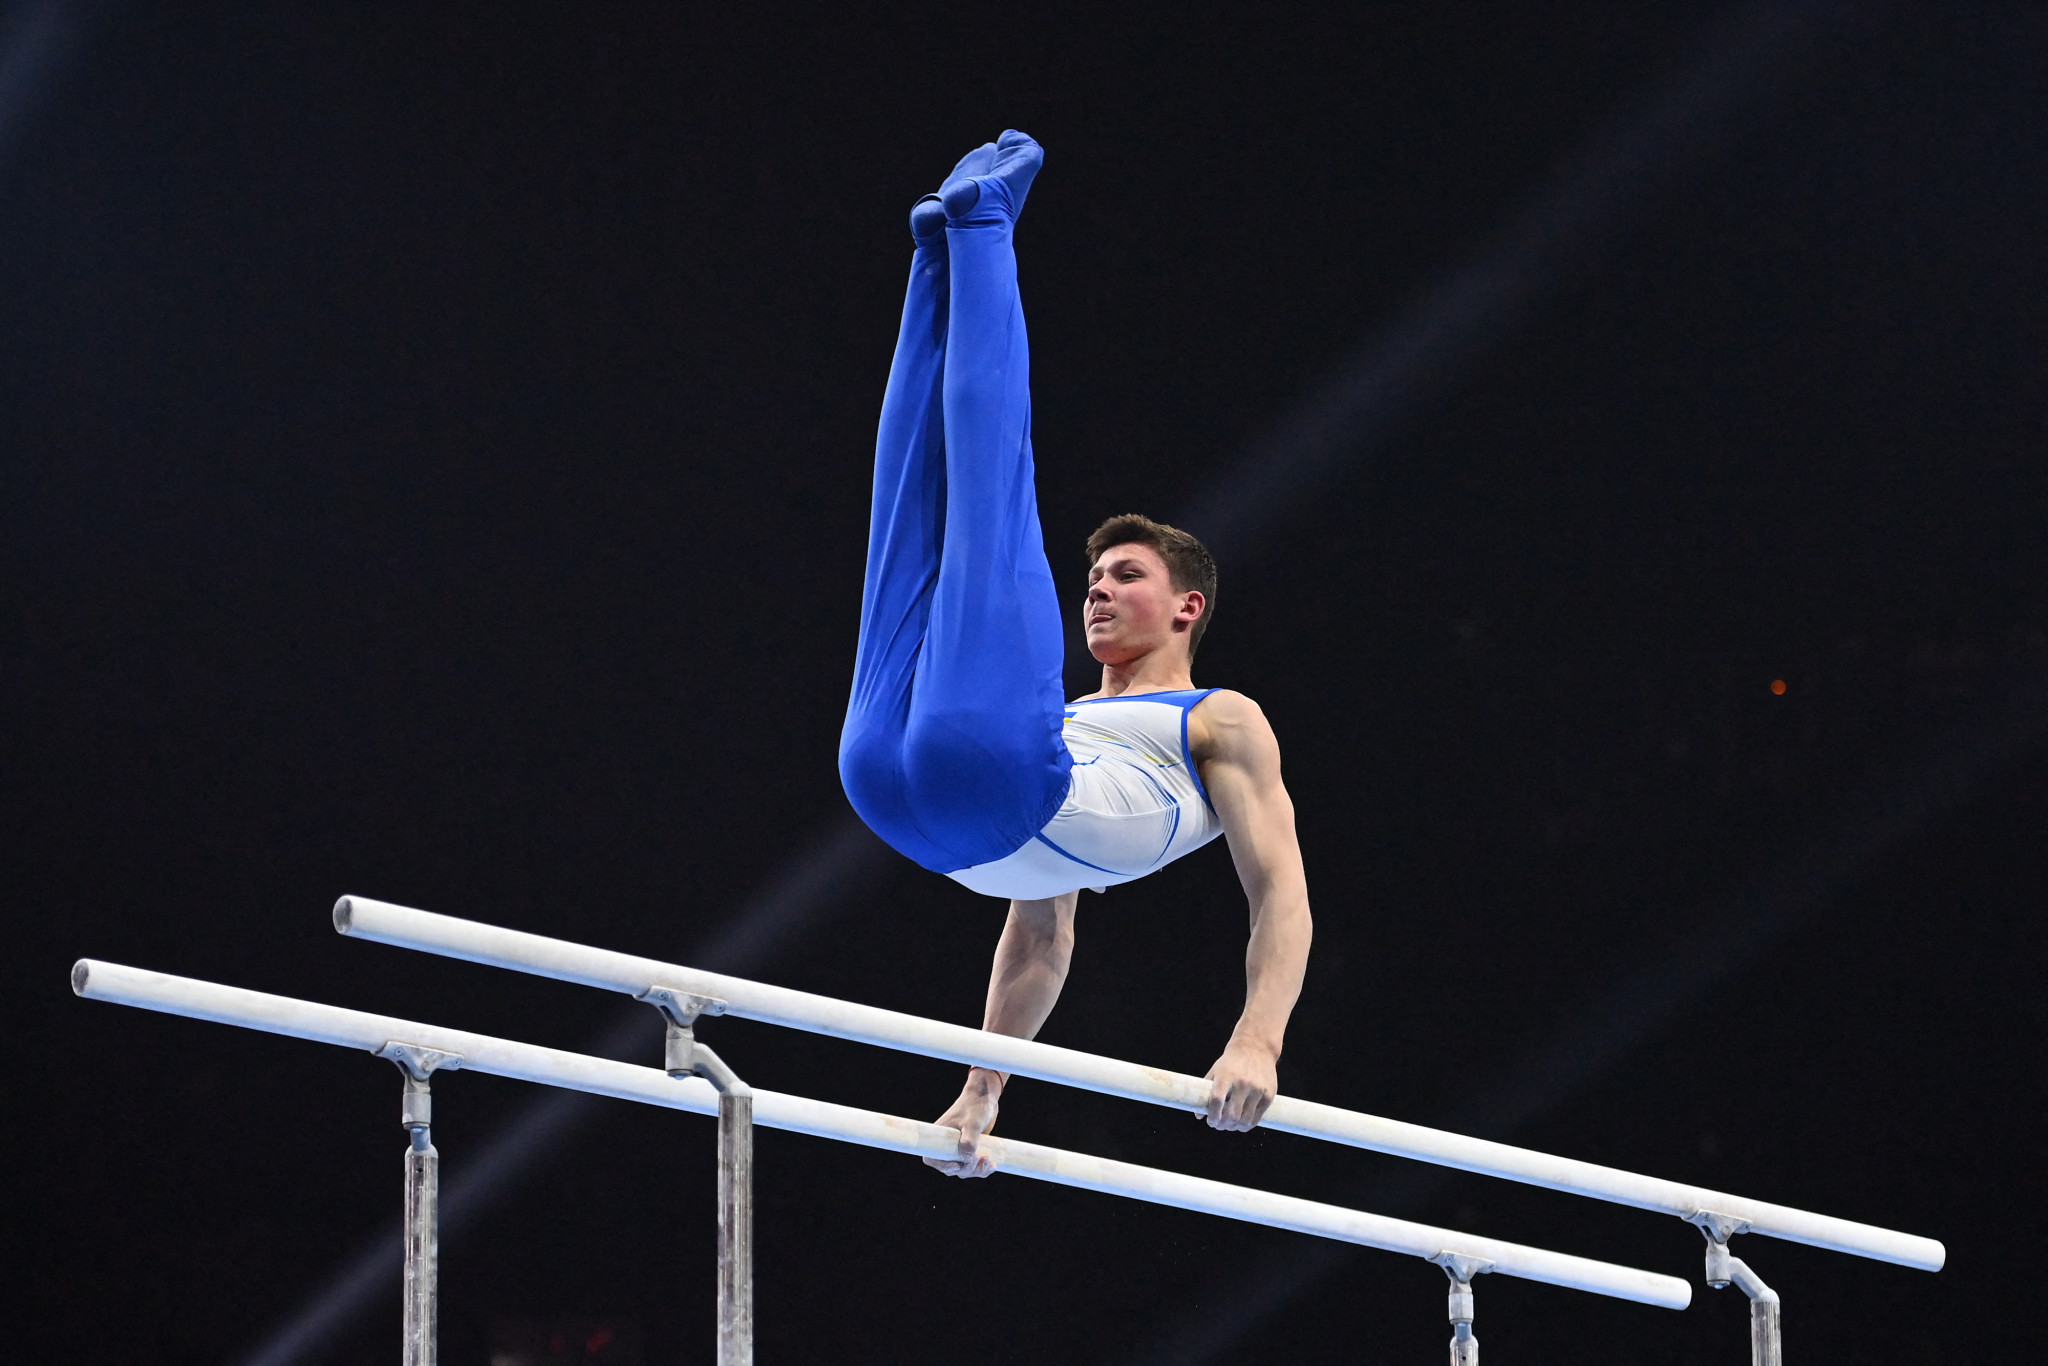 Ukraine’s Kovtun earns parallel bars victory at Gymnastics World Cup in